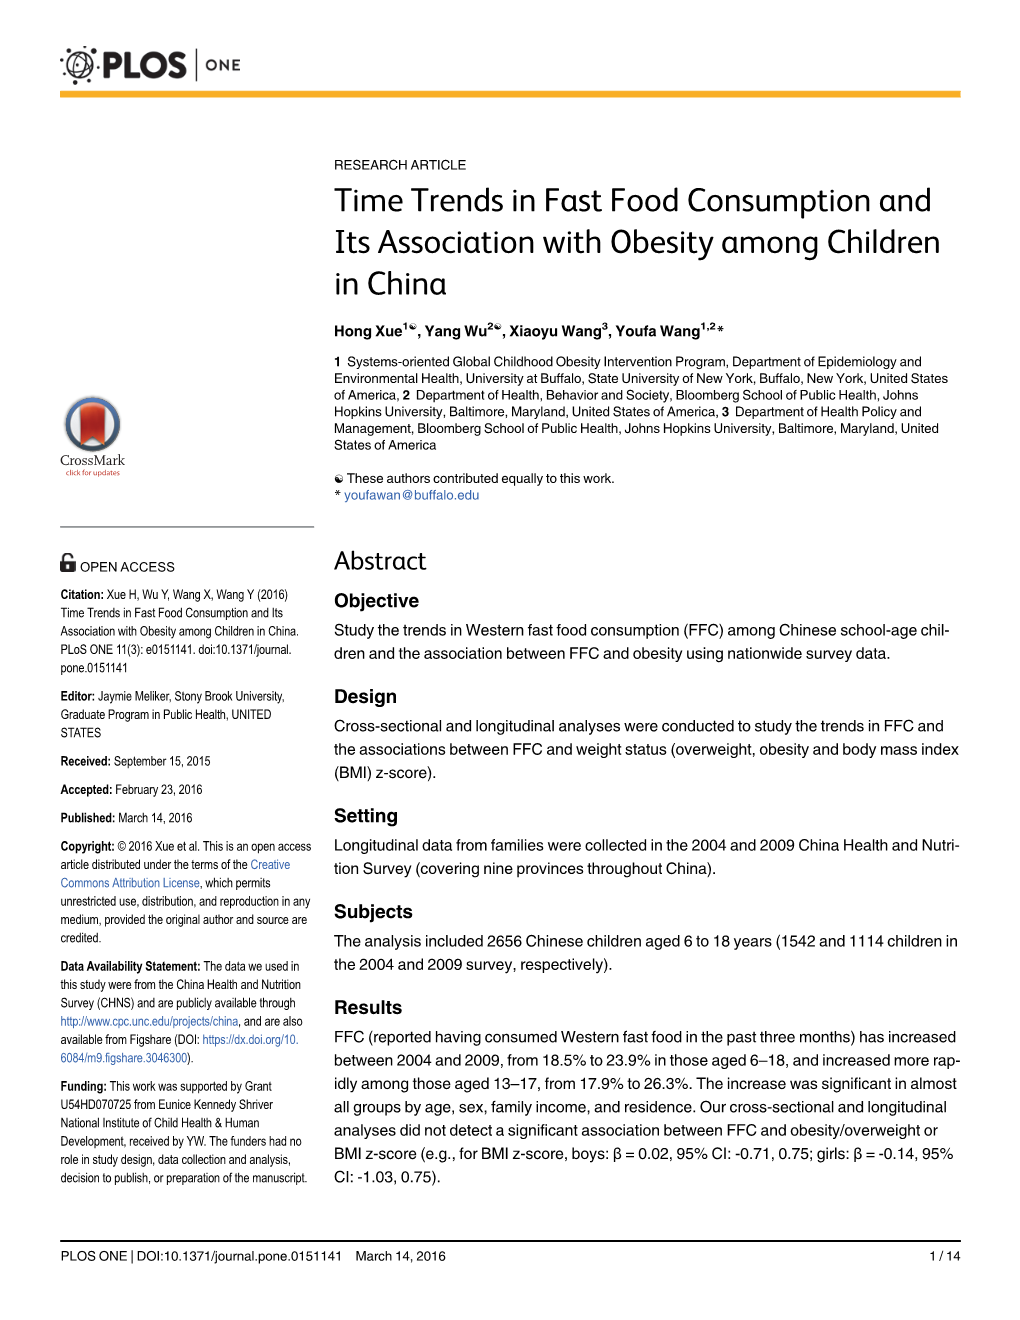 Time Trends in Fast Food Consumption and Its Association with Obesity Among Children in China